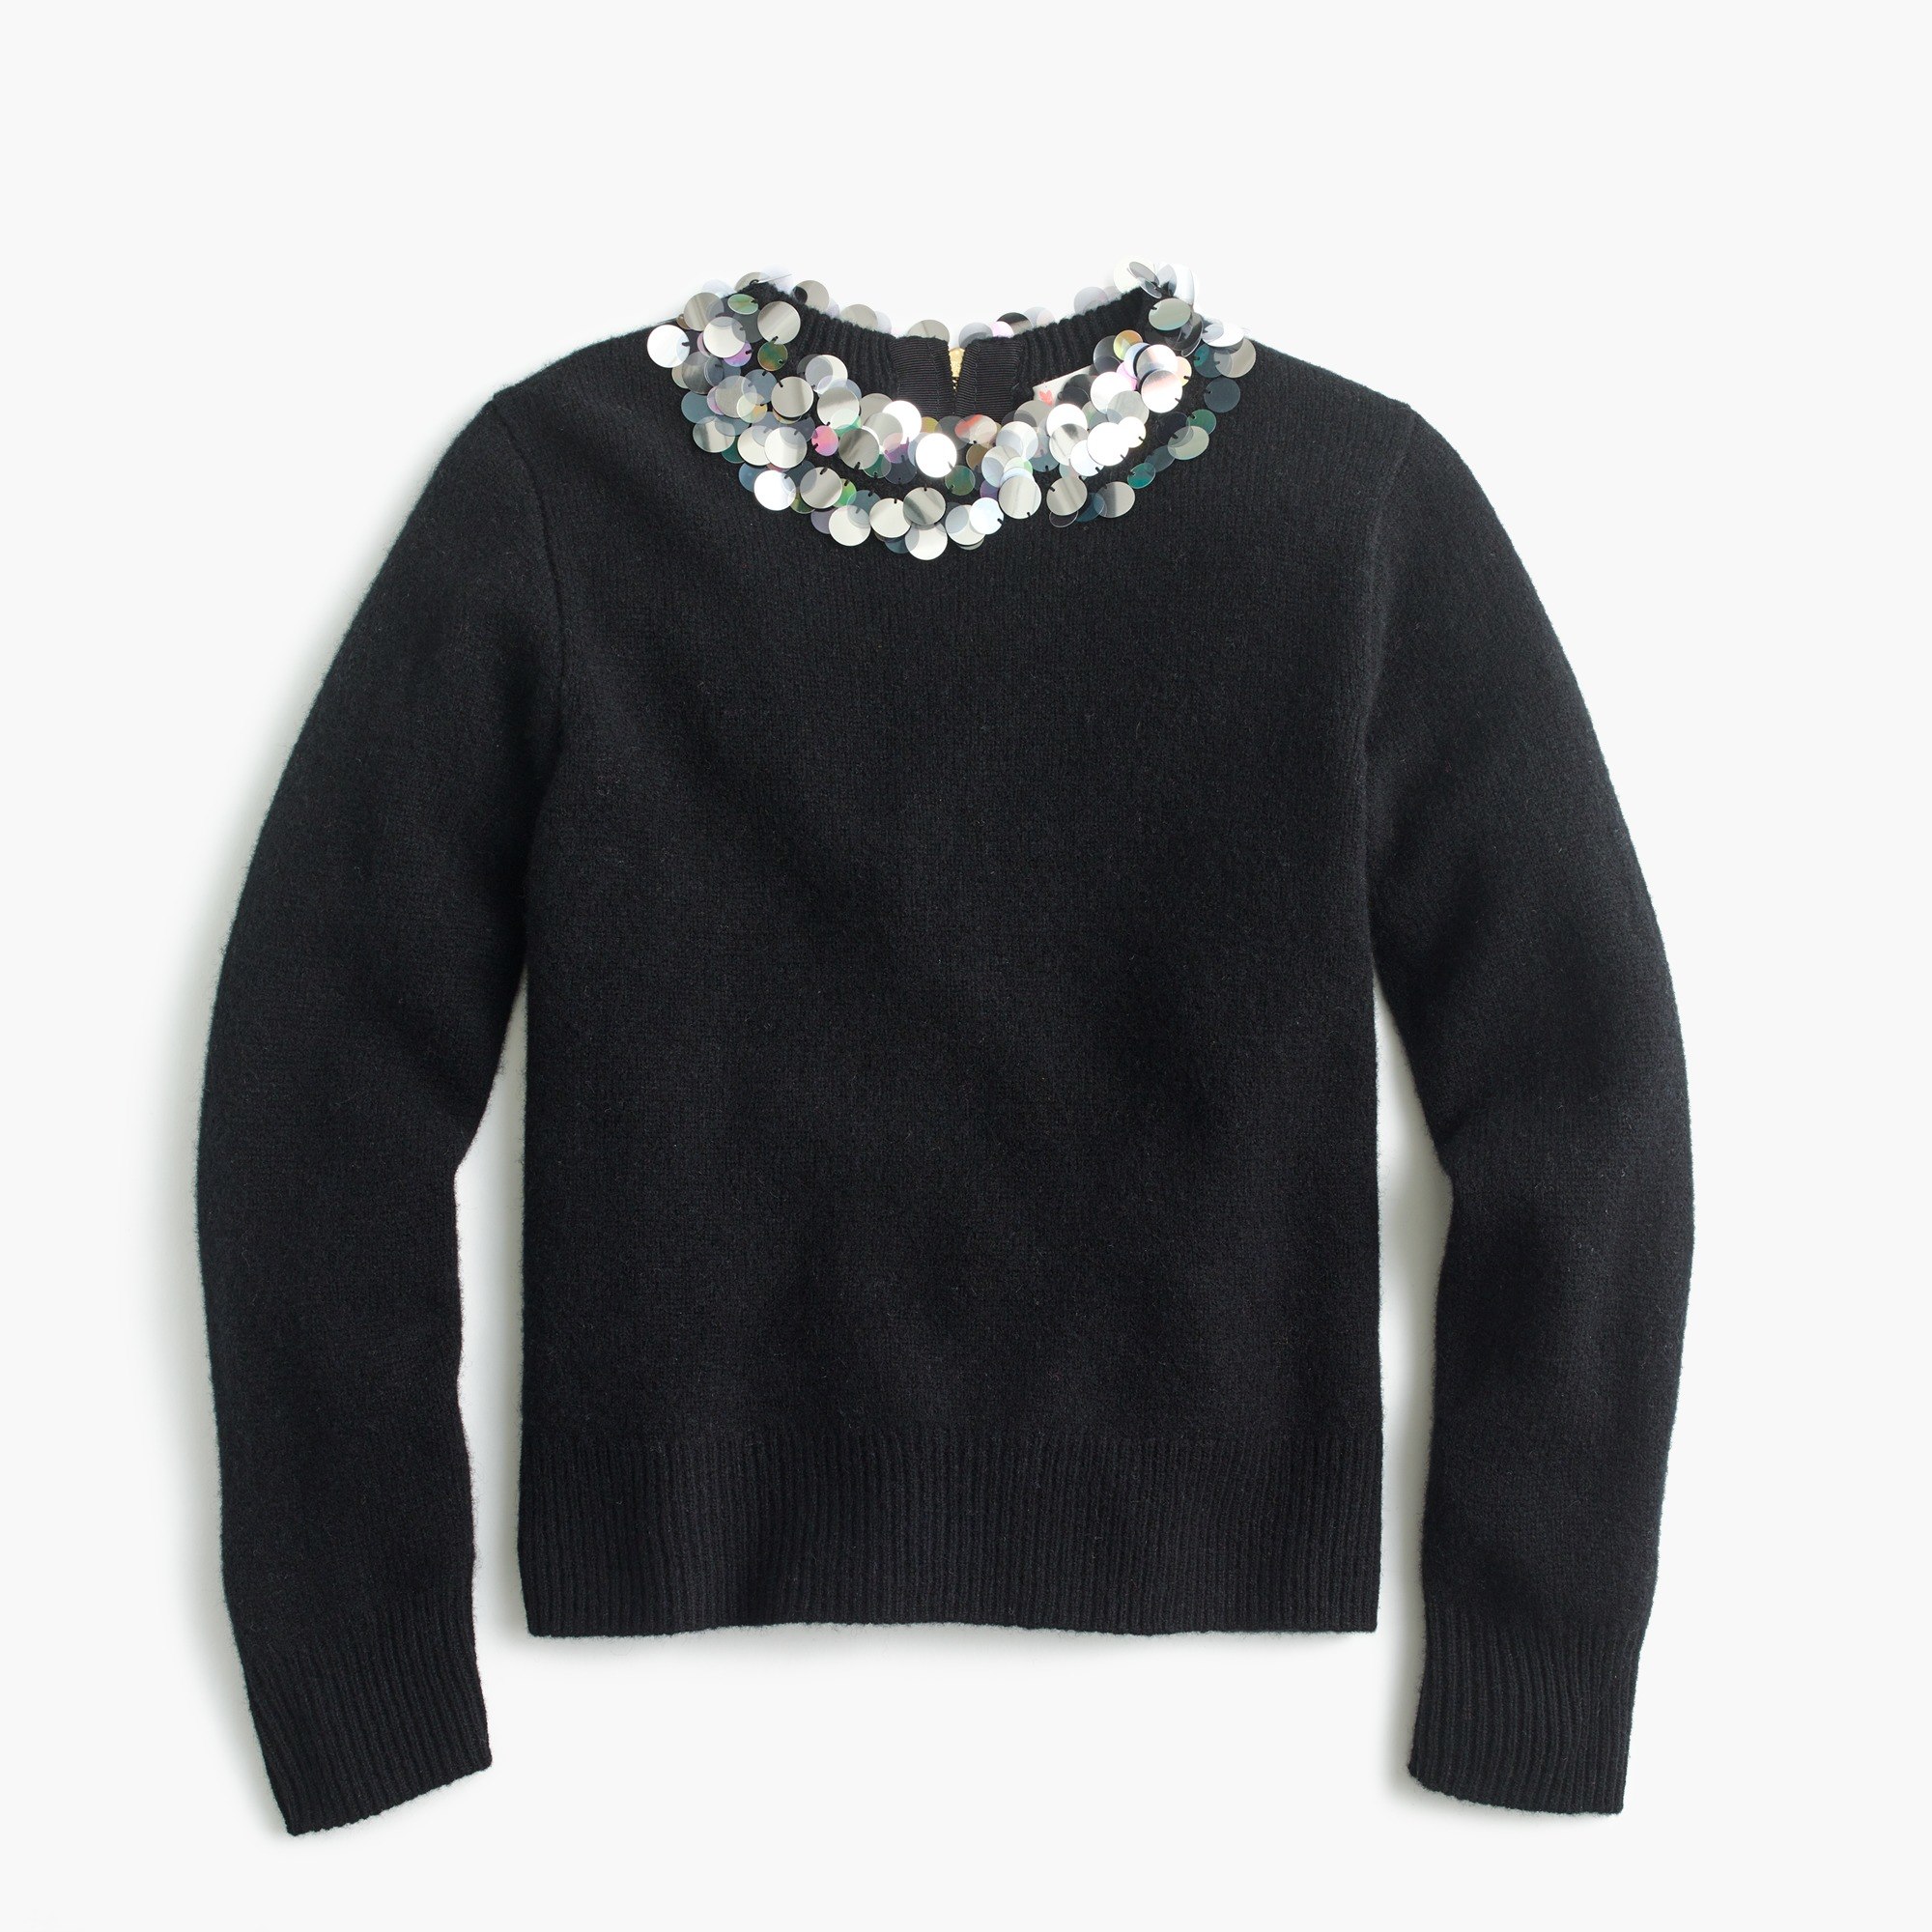 Girls' Wool Popover Sweater With Embellished Collar : Girls